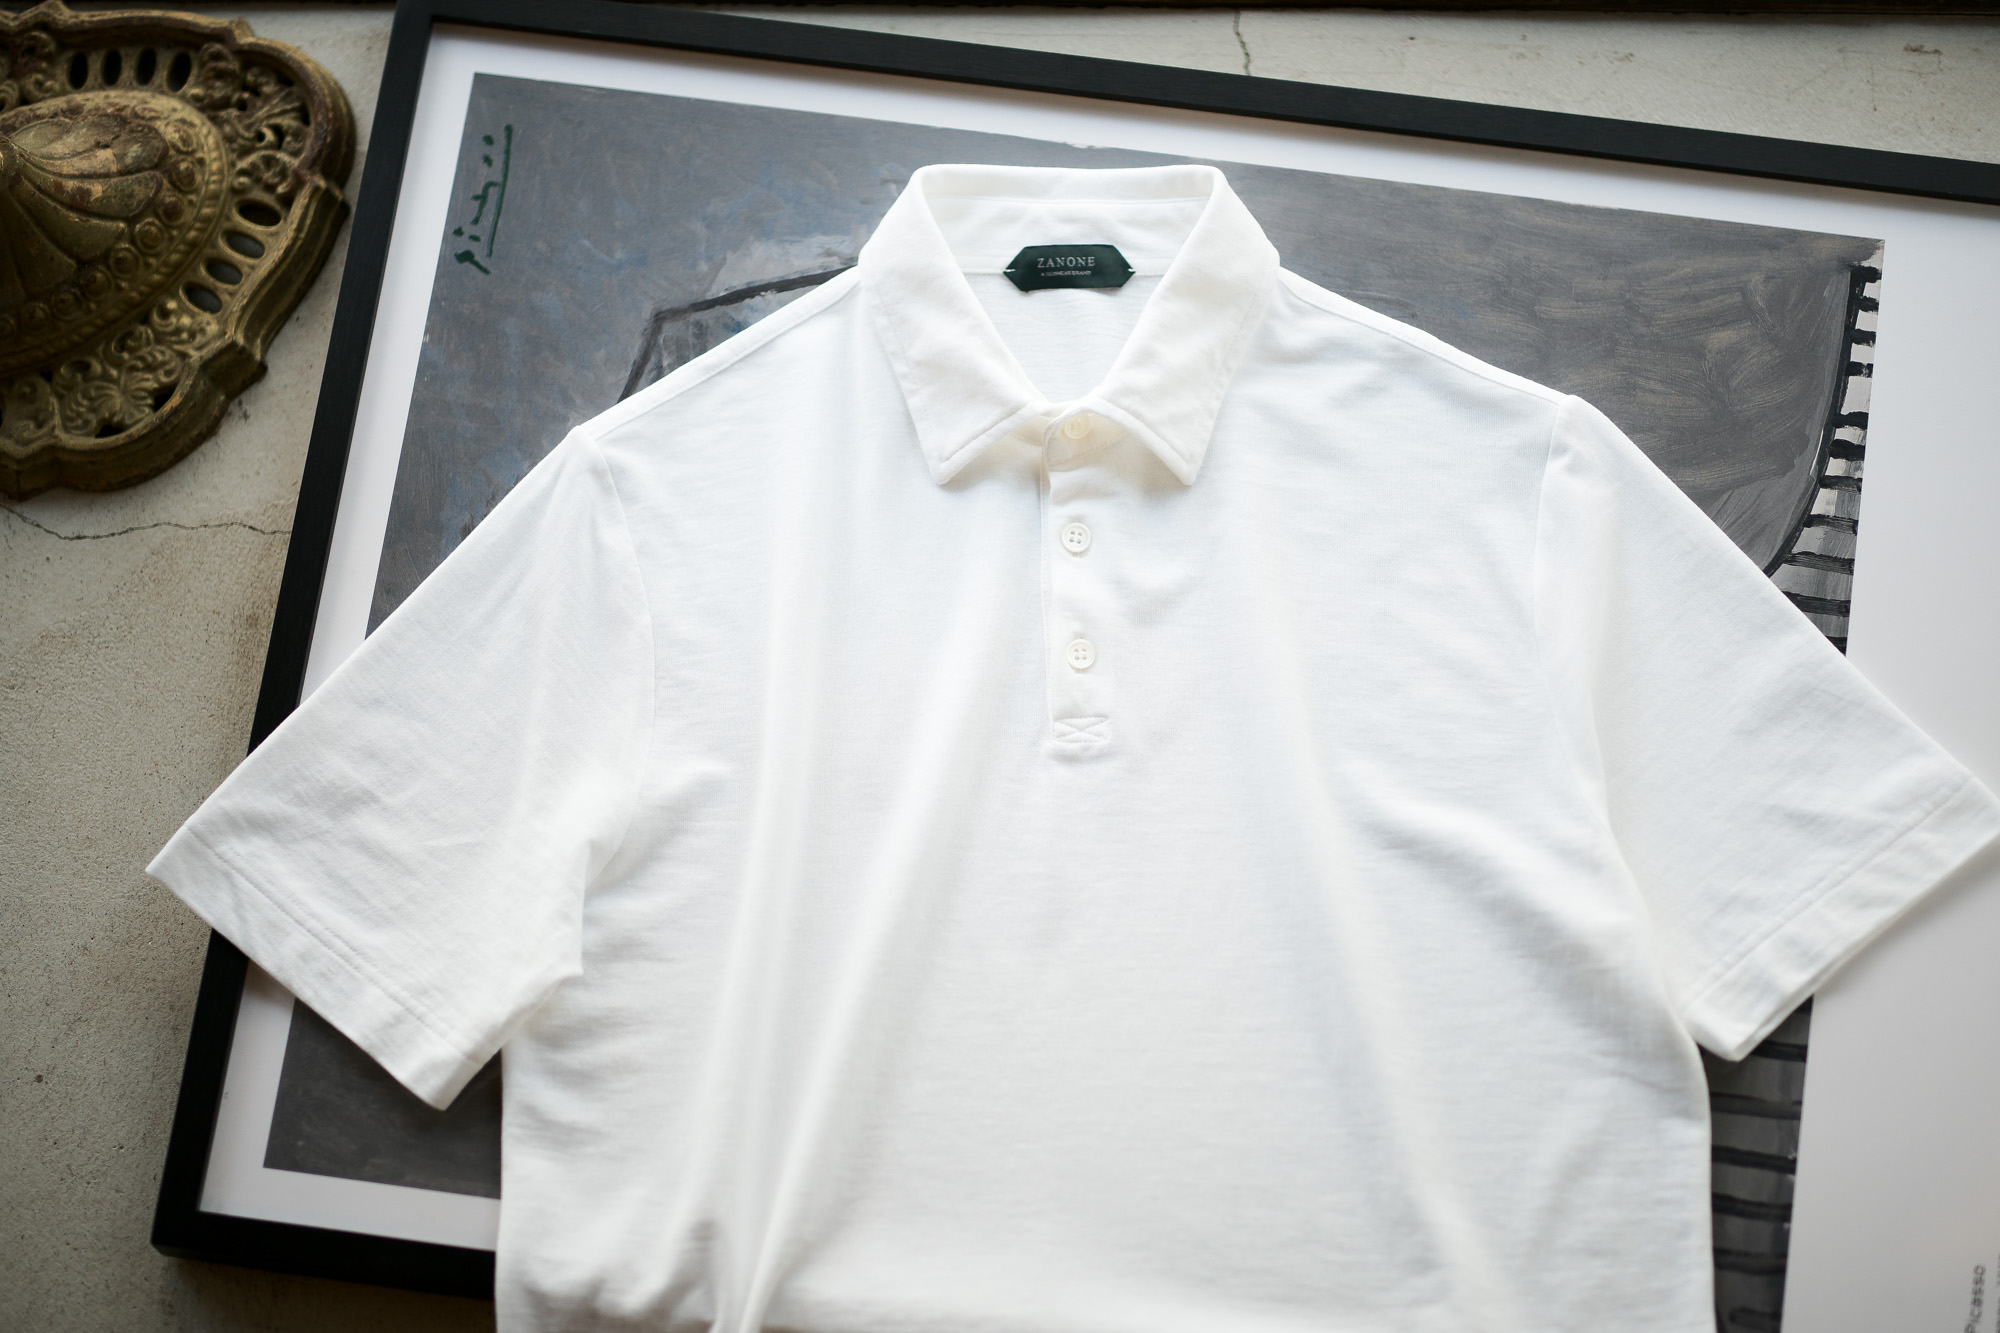 ZANONE(ザノーネ) Polo Shirt ice cotton アイスコットン ポロシャツ WHITE (ホワイト・Z0001) made in italy (イタリア製) 2020春夏新作 愛知 名古屋 altoediritto アルトエデリット